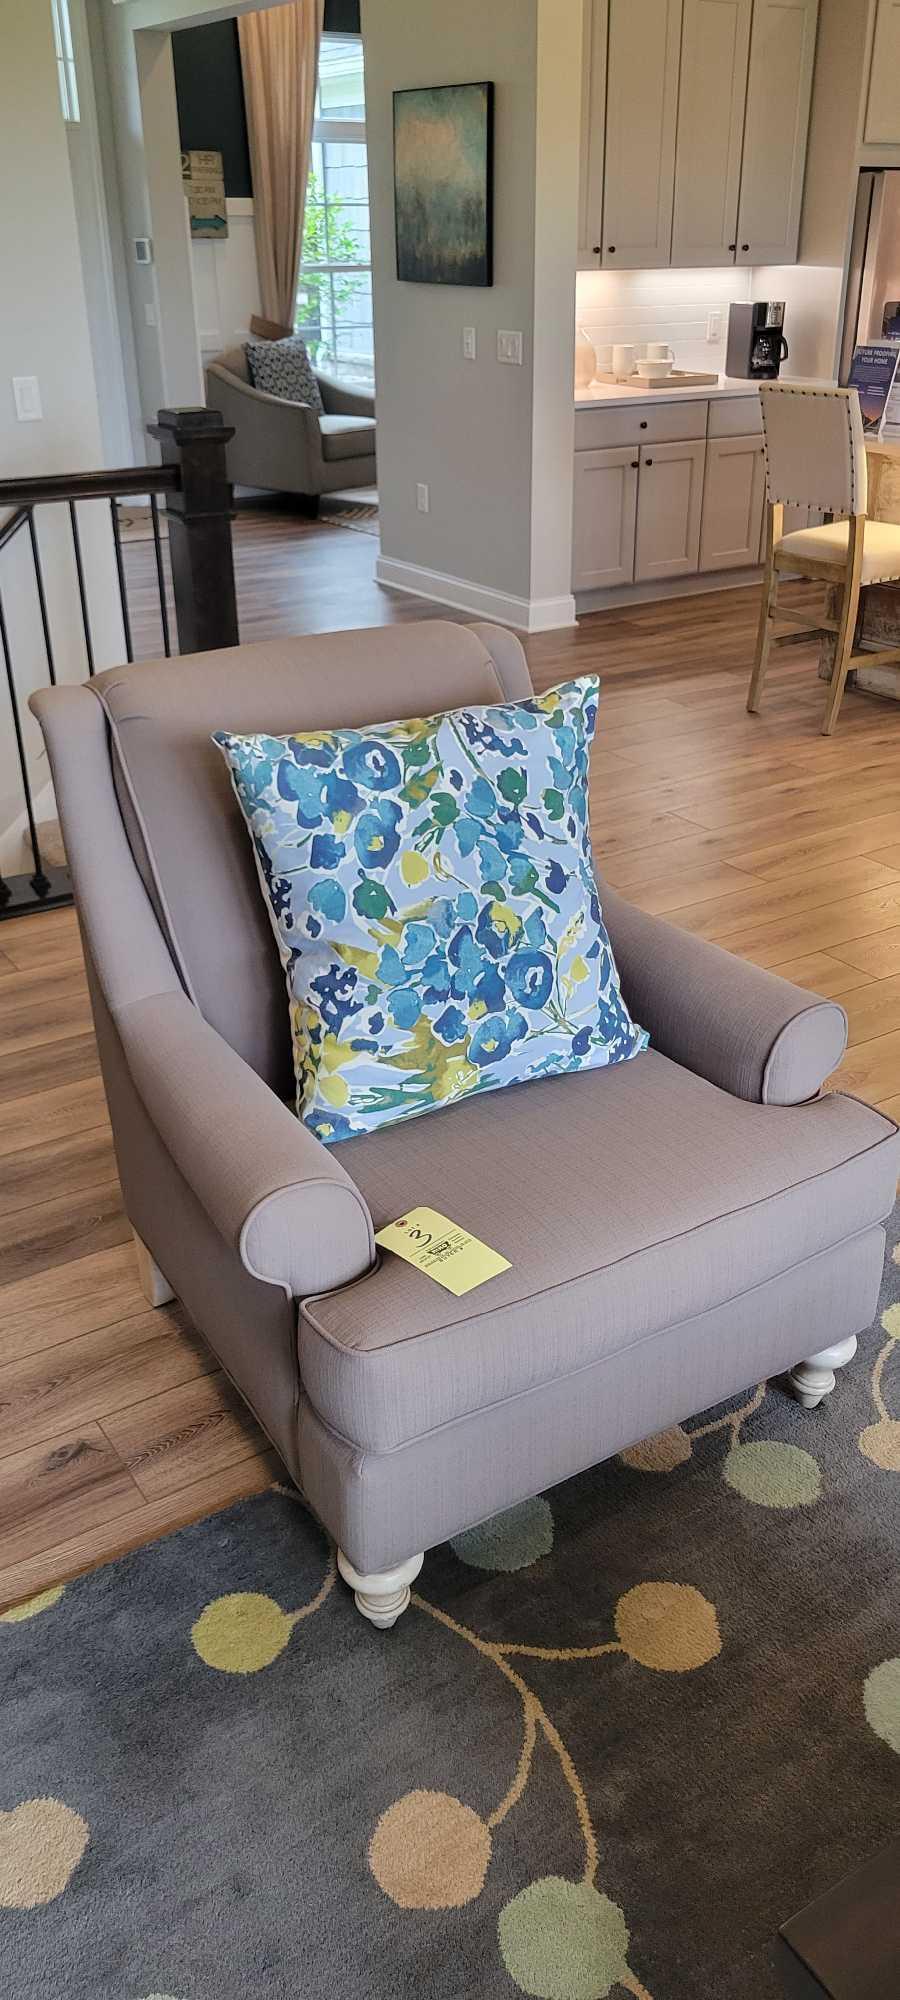 Bassett upholstered chair with accent pillow